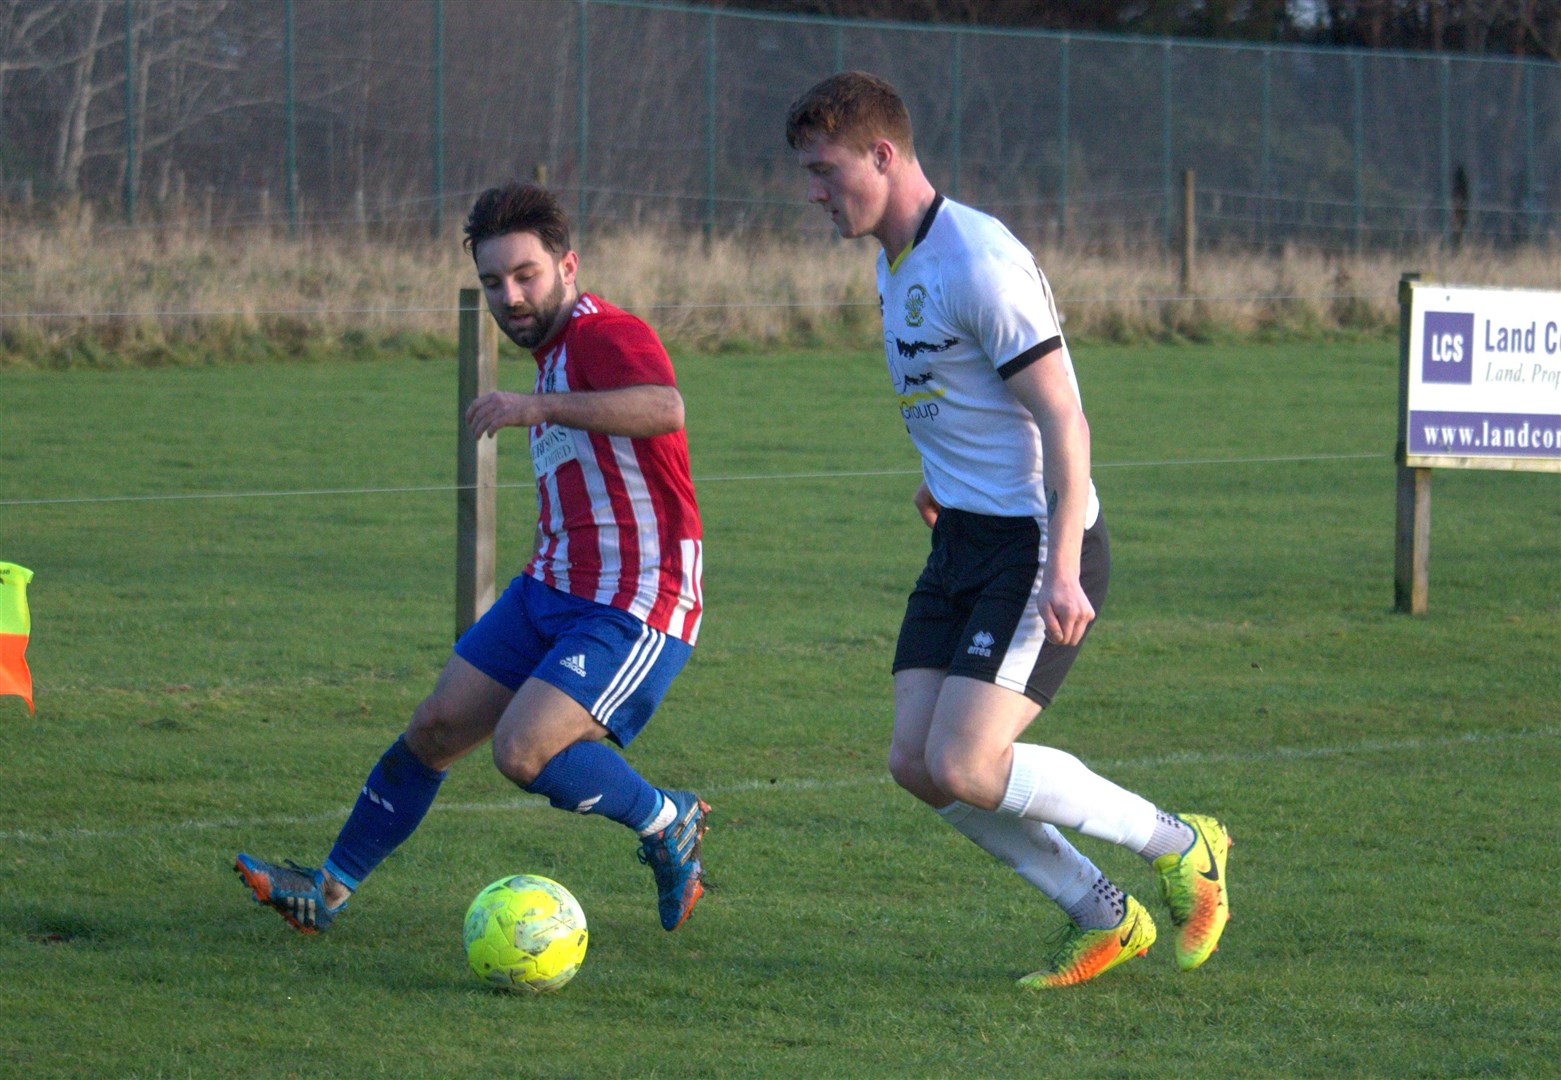 Clach A lost 3-2 to St Duthus on Saturday.